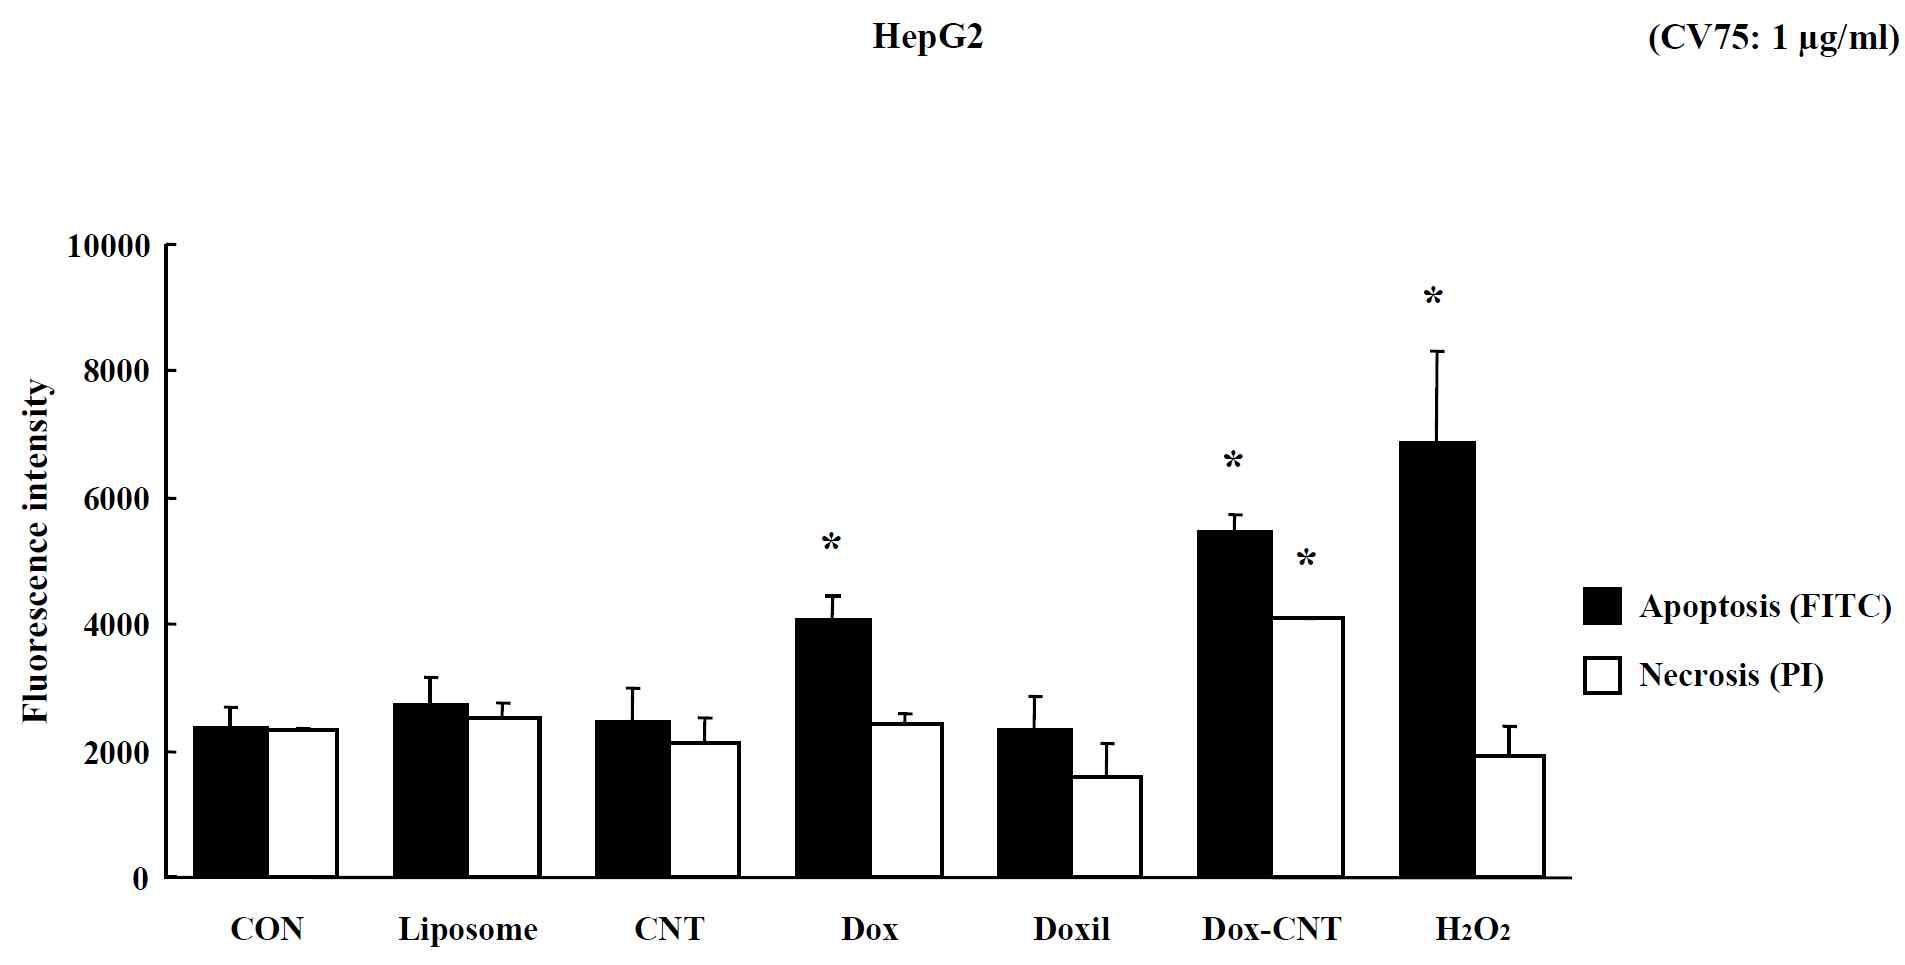 Effects of nano-anticancer drugs in the apoptosis & necrosis of HepG2. Cells were exposed to 1 μg/ml and analyzed by Annexin V-FITC/PI staining. Data are shown as means ± SE (n = 5). * p<0.05, significantly different from the control.